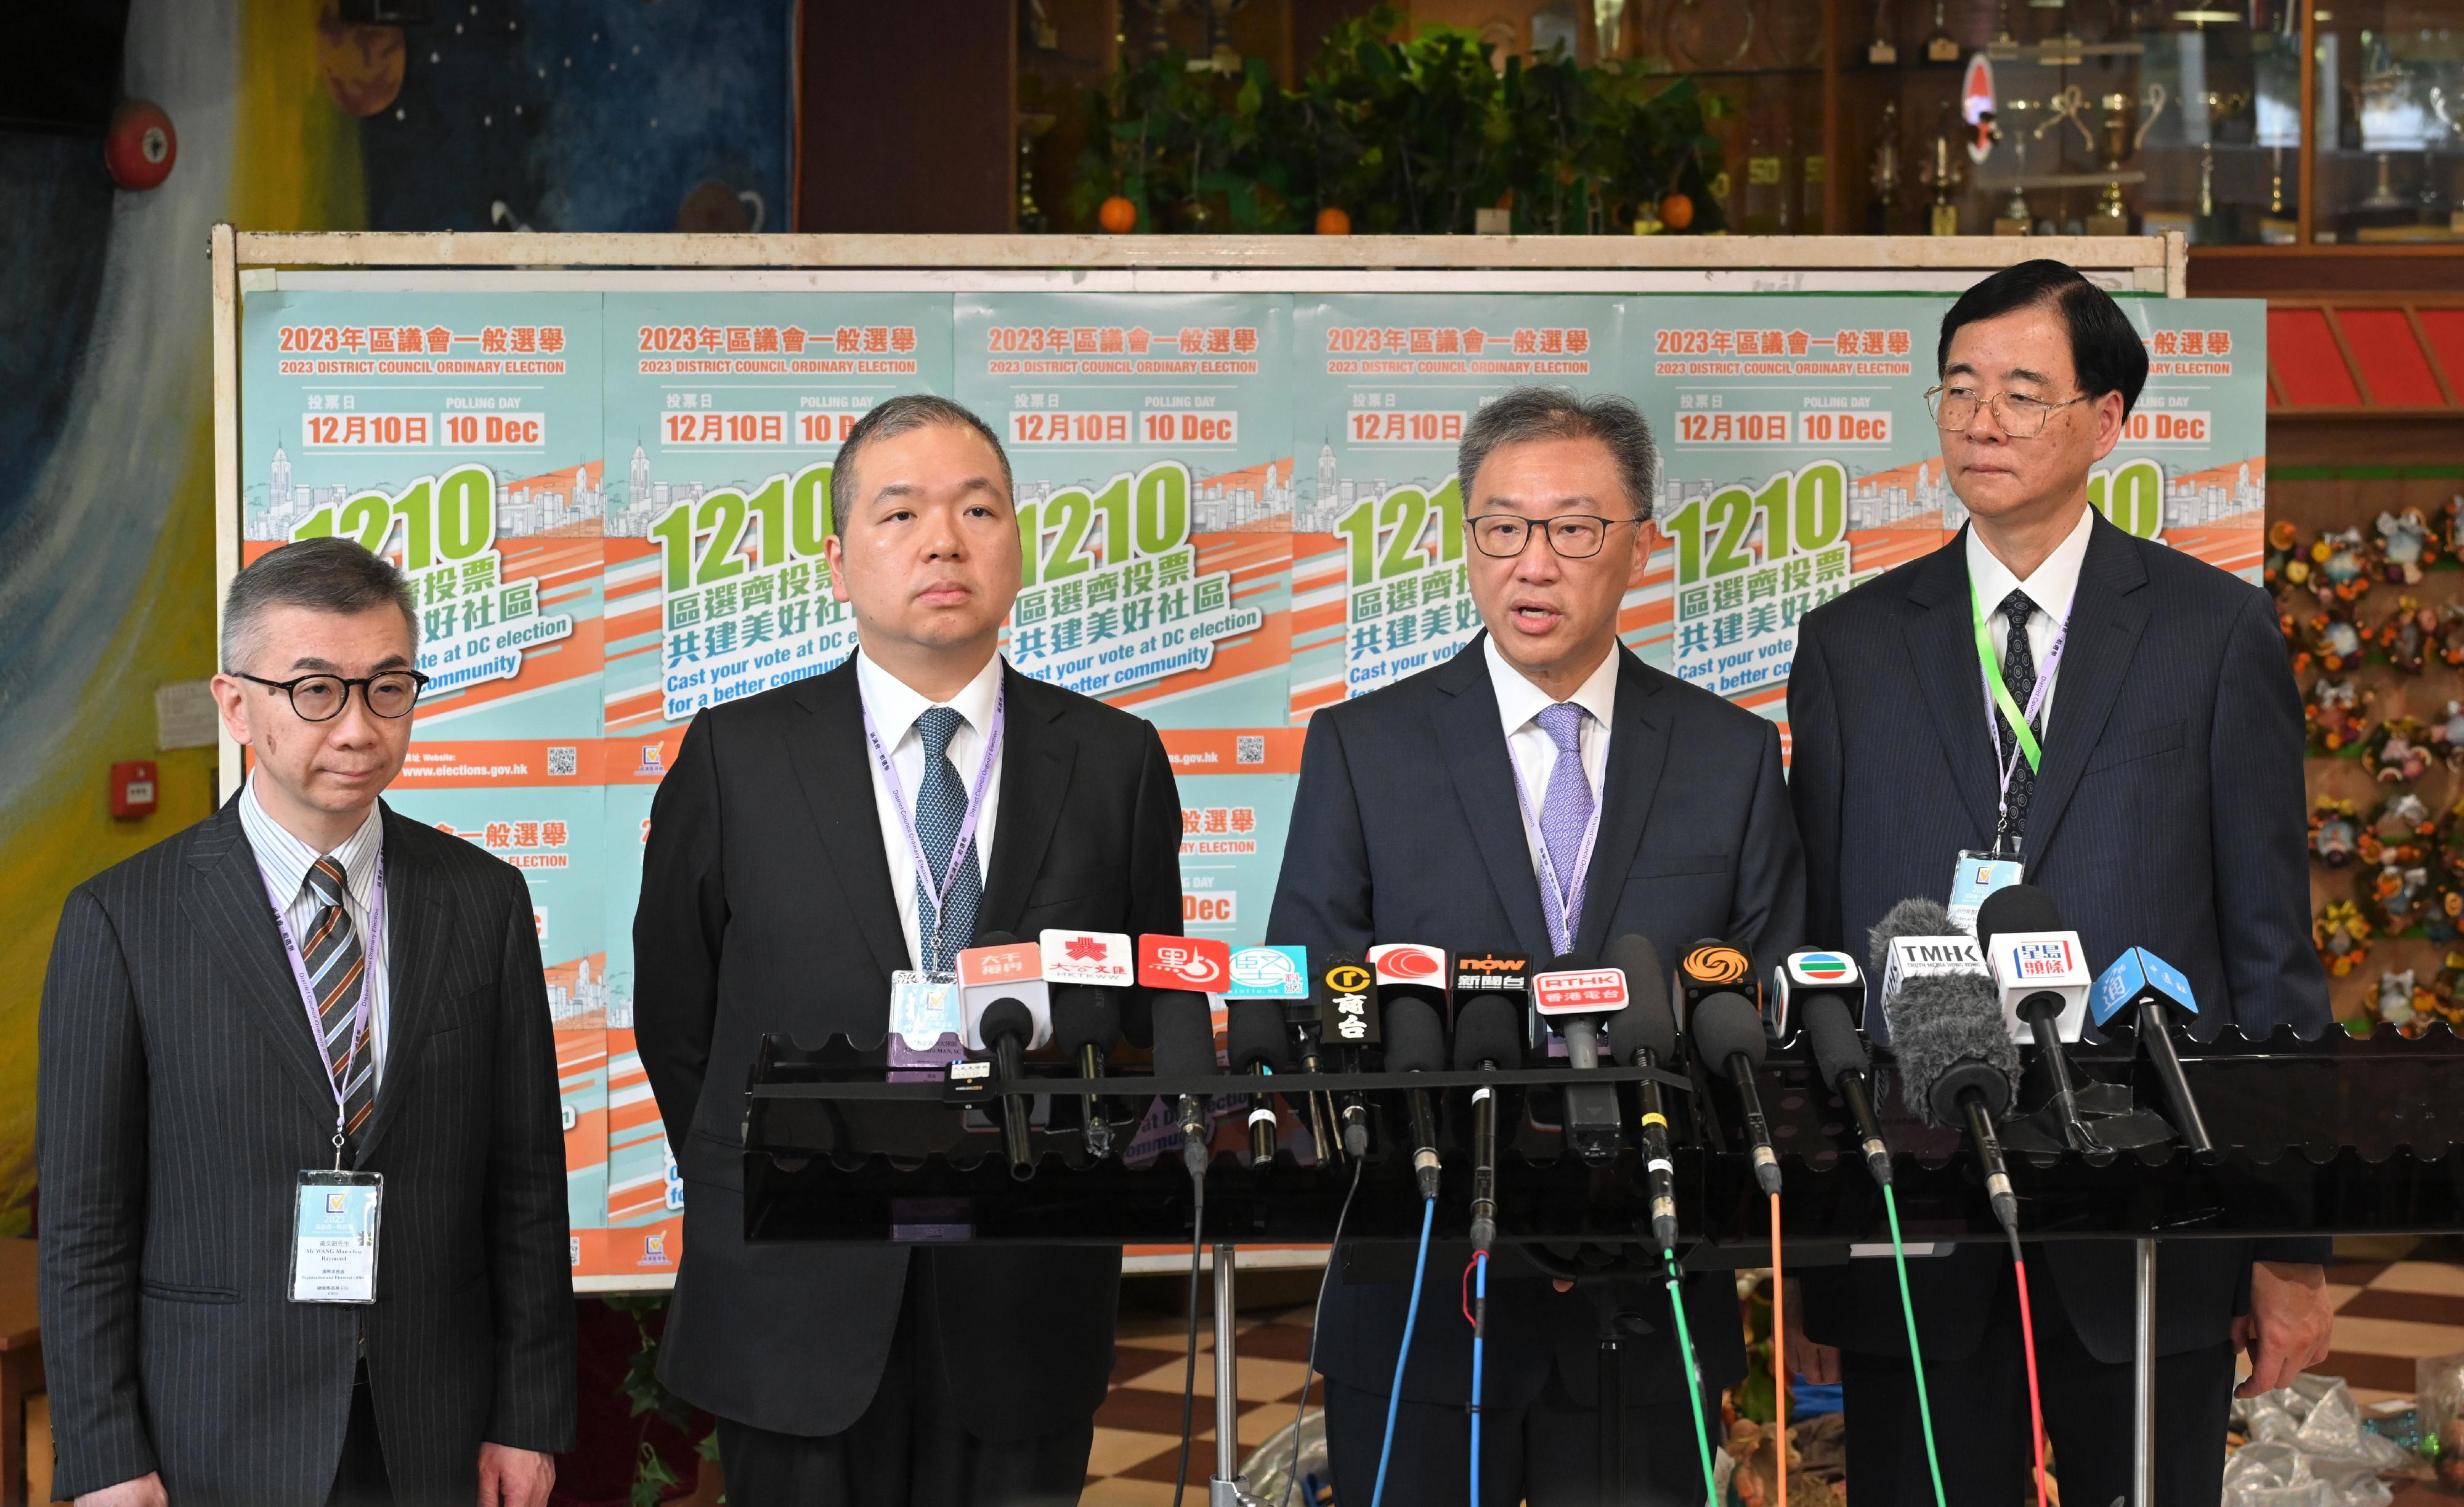 The Chairman of the Electoral Affairs Commission (EAC), Mr Justice David Lok (second right), EAC members Professor Daniel Shek (first right) and Mr Bernard Man, SC (third right), meet the media after inspecting the District Council geographical constituency polling station of the 2023 District Council Ordinary Election at the Yaumati Catholic Primary School (Hoi Wang Road) this morning (December 10). Also present is the Chief Electoral Officer of the Registration and Electoral Office, Mr Raymond Wang (fourth right).